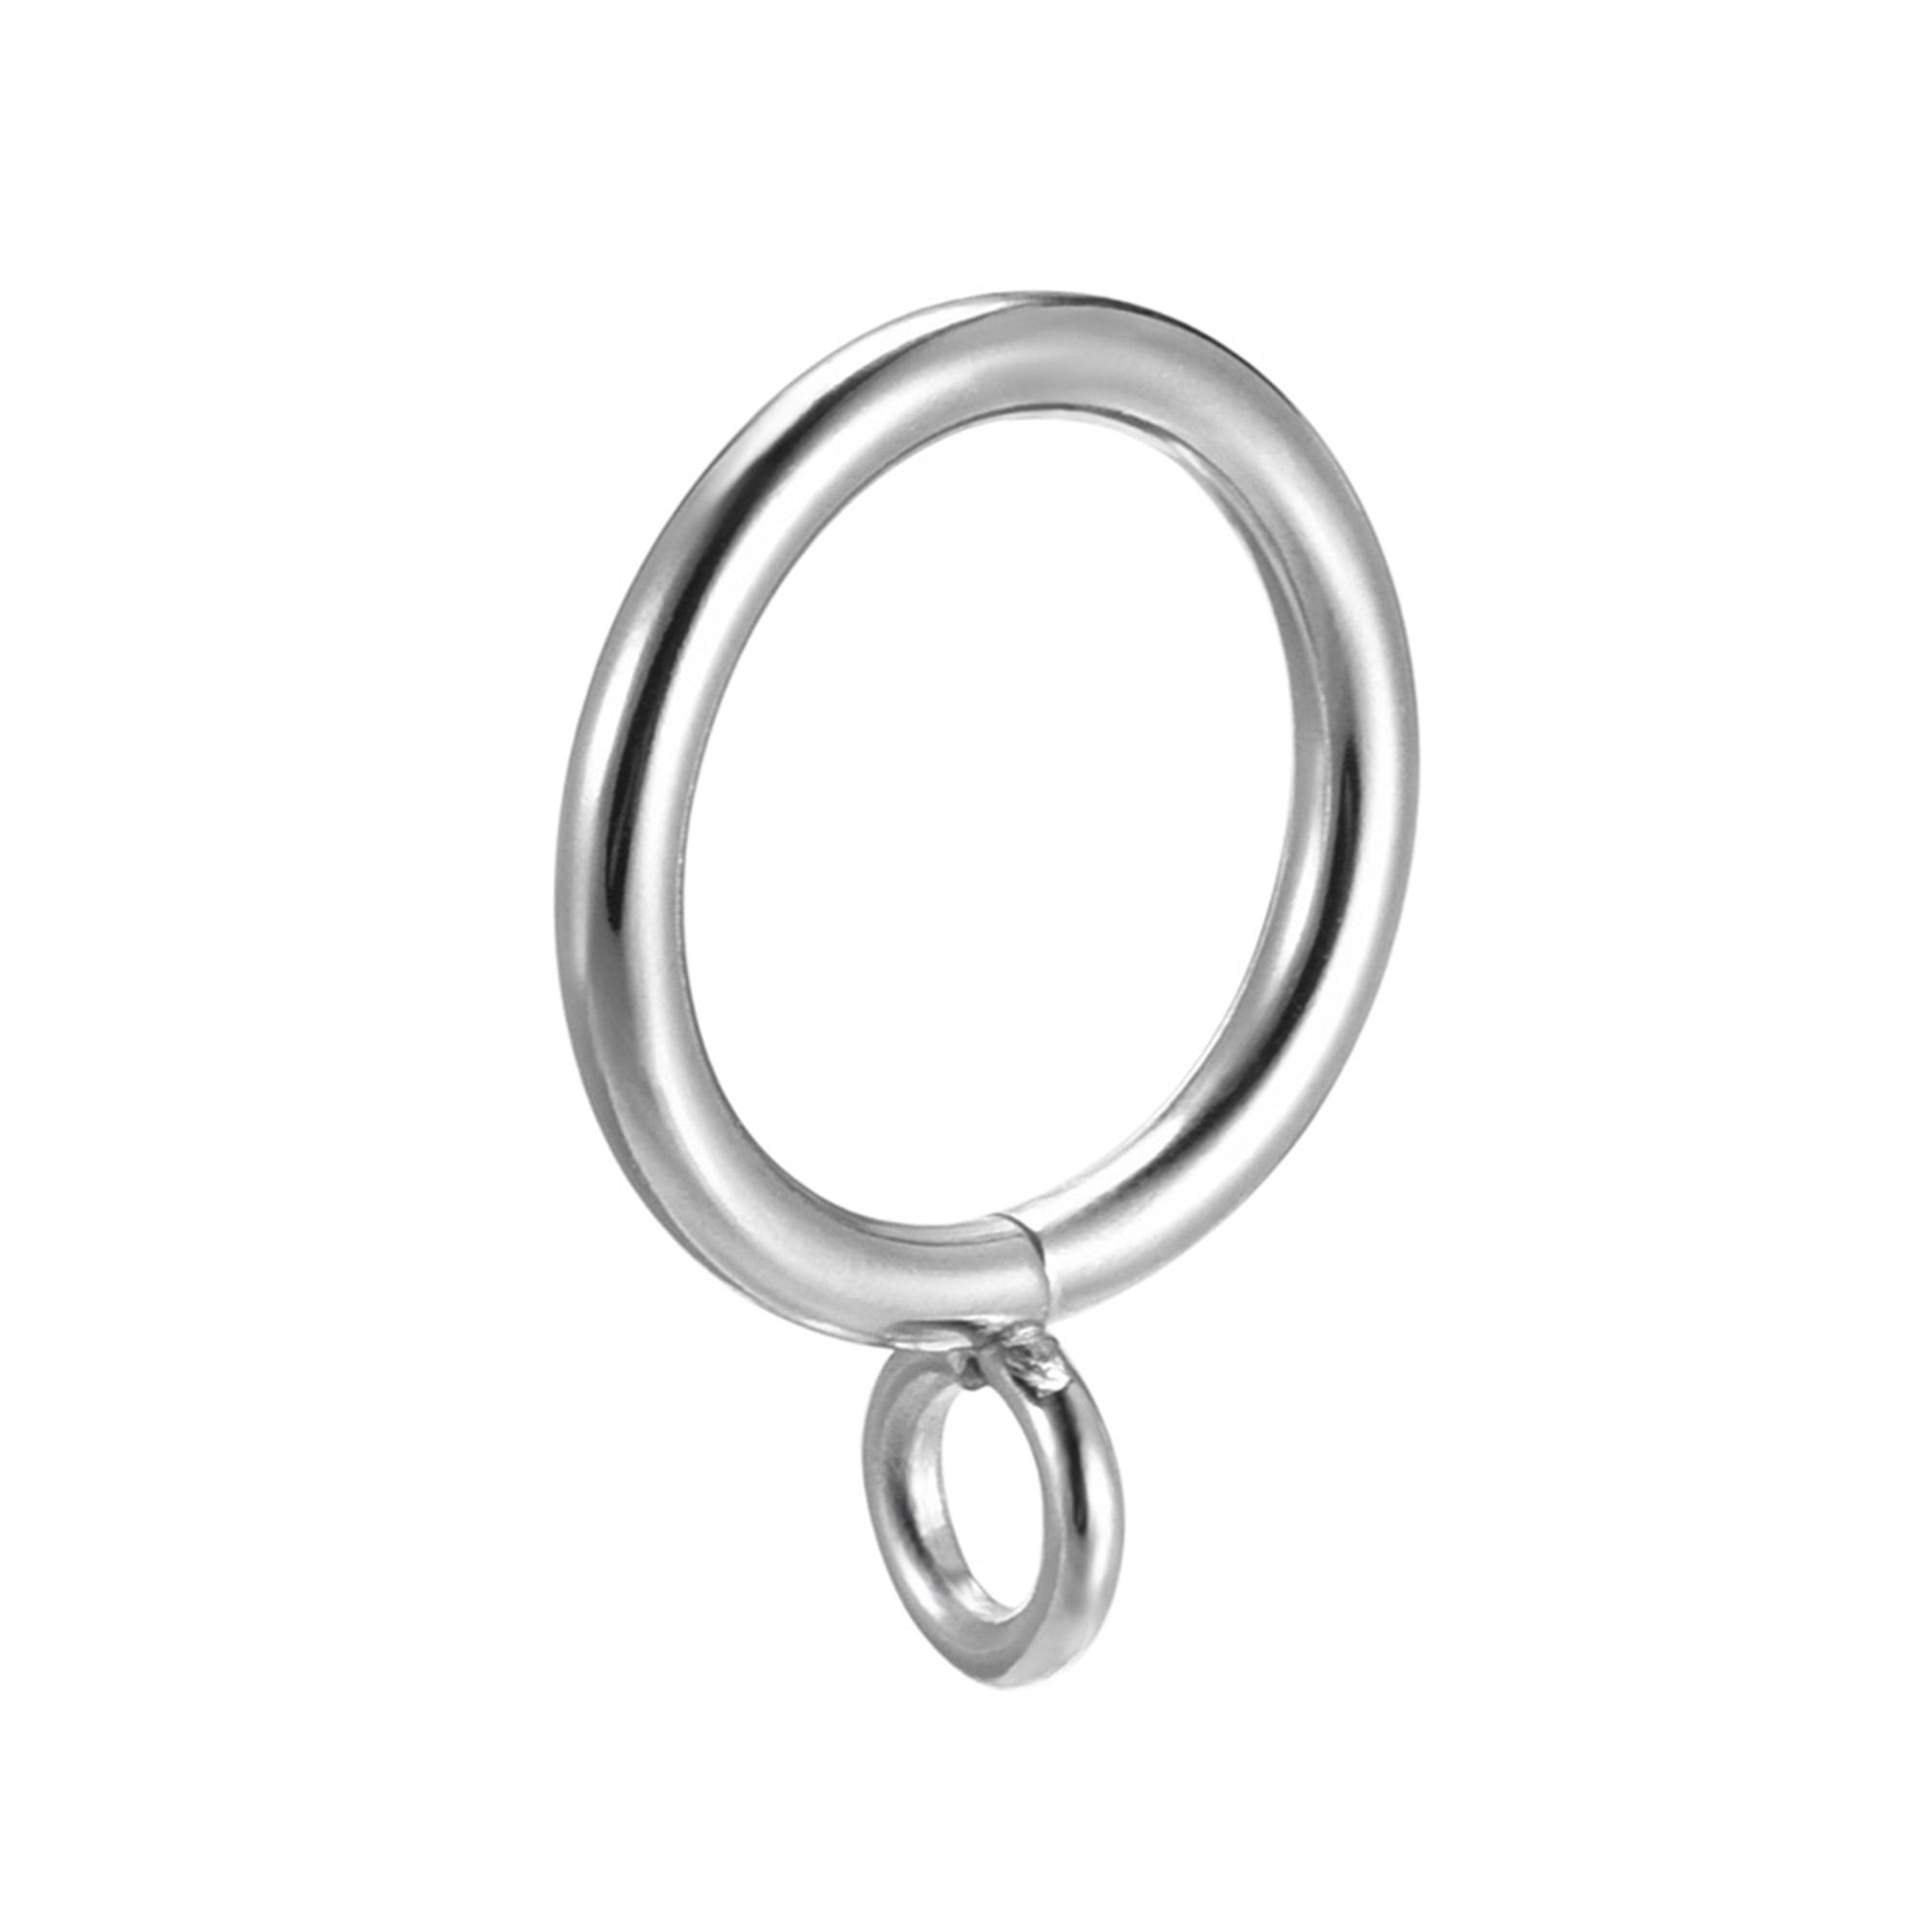 Quality 25mm 28mm Metal Curtain Pole Rings Highly Polished Chrome Silver 